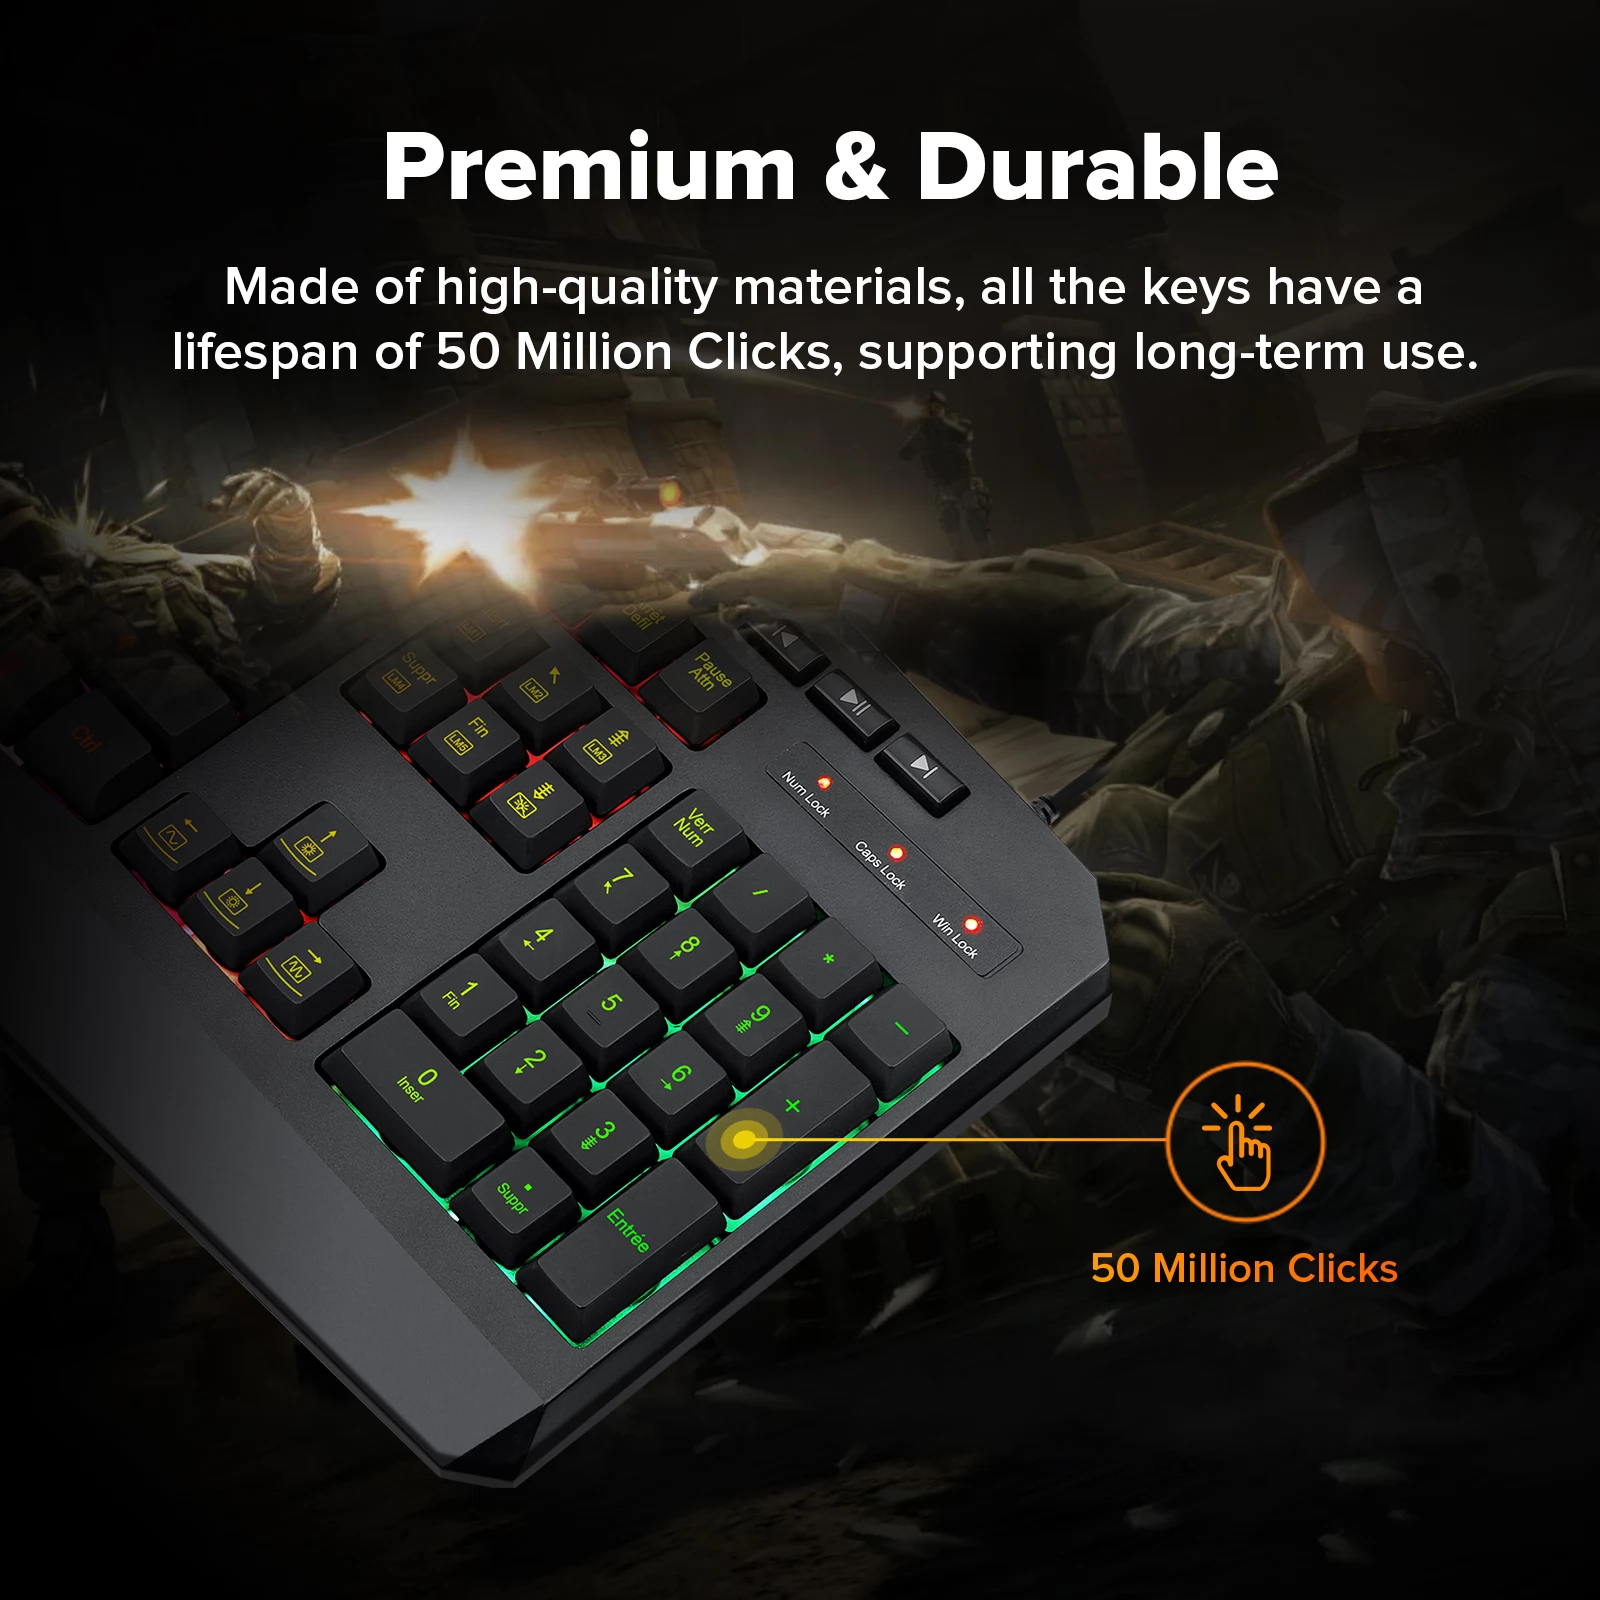 Redragon S101-K Wired Keyboard and Mouse Combo, RGB Backlit Keyboard, AZERTY FR Layout and 4 DPI Levels Mouse